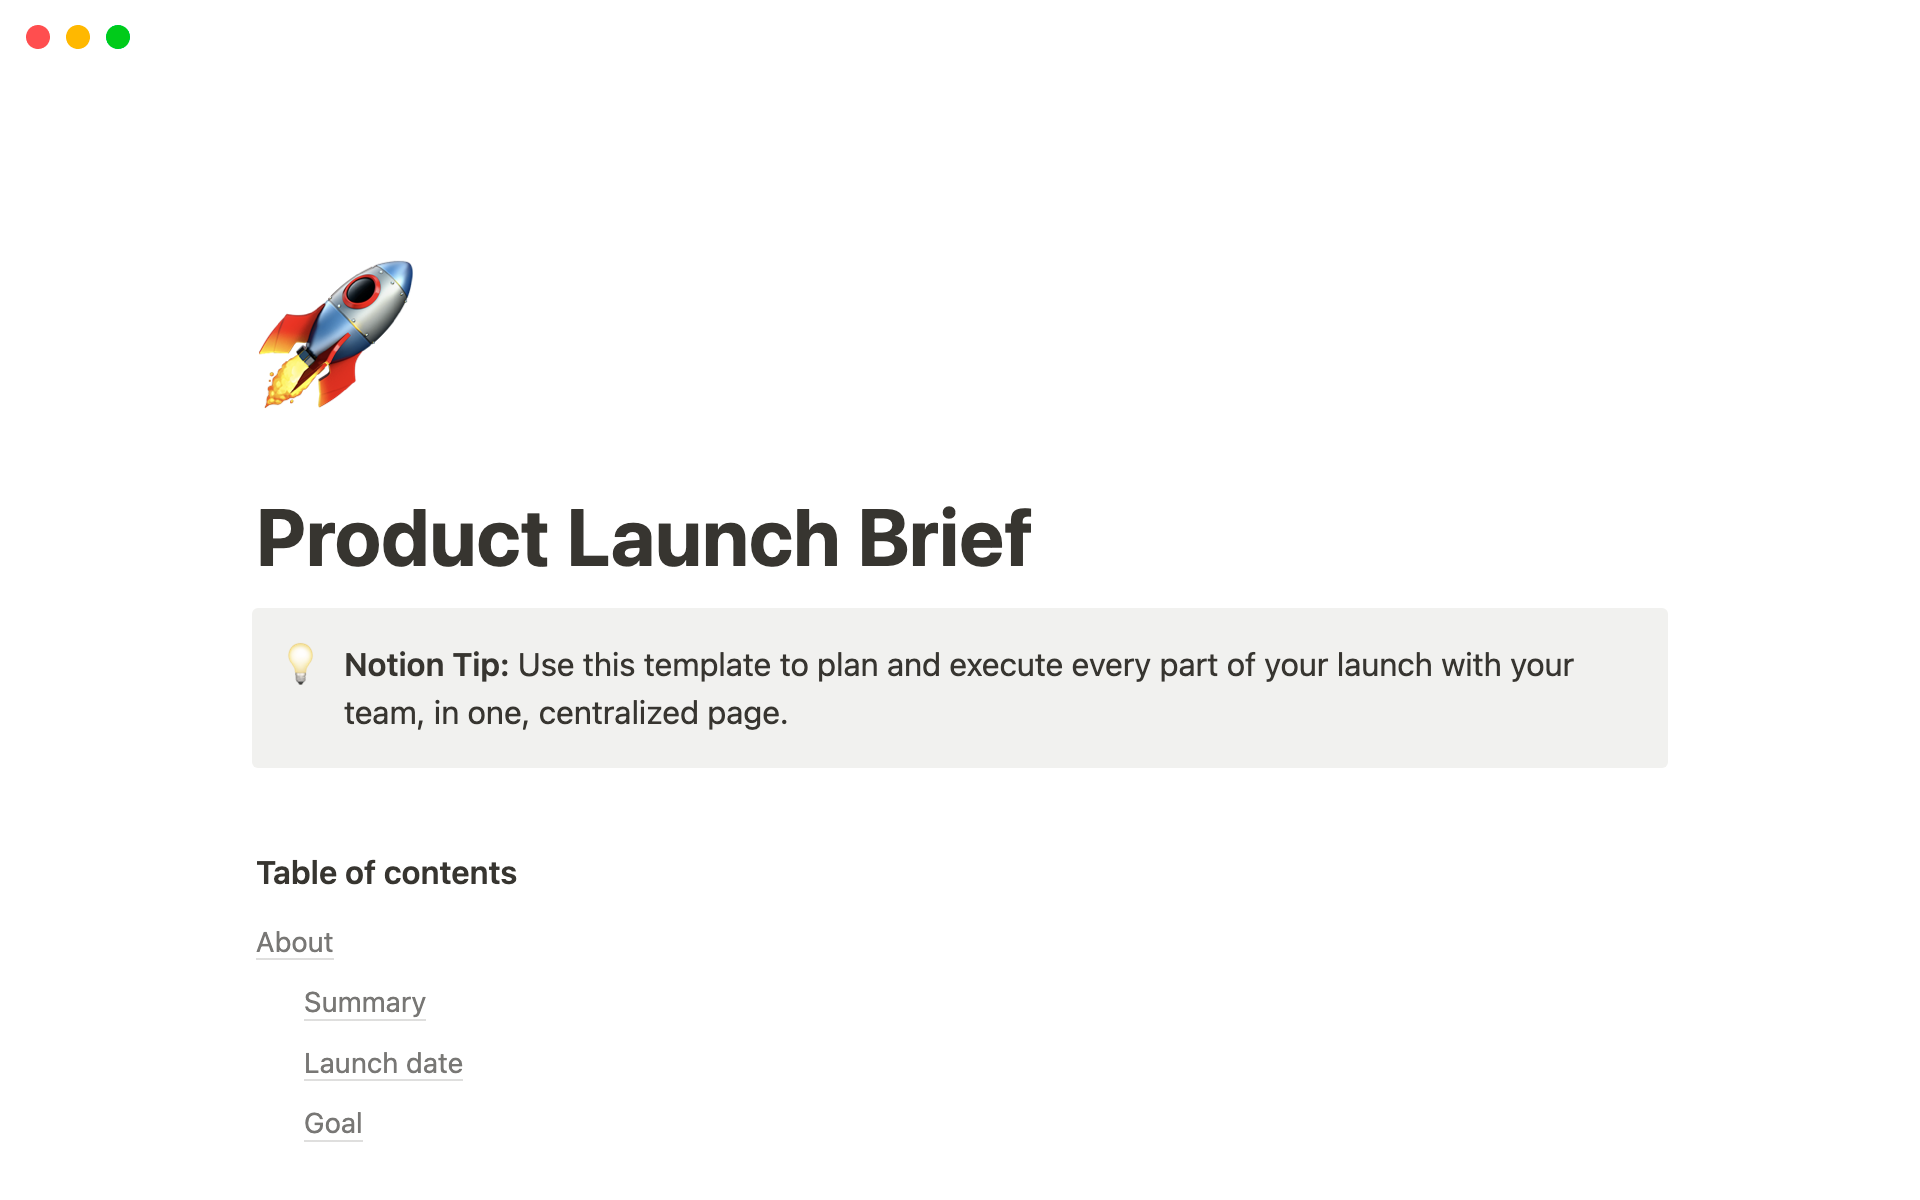 Use this template to plan and execute every part of your launch with your team, in one, centralized page.